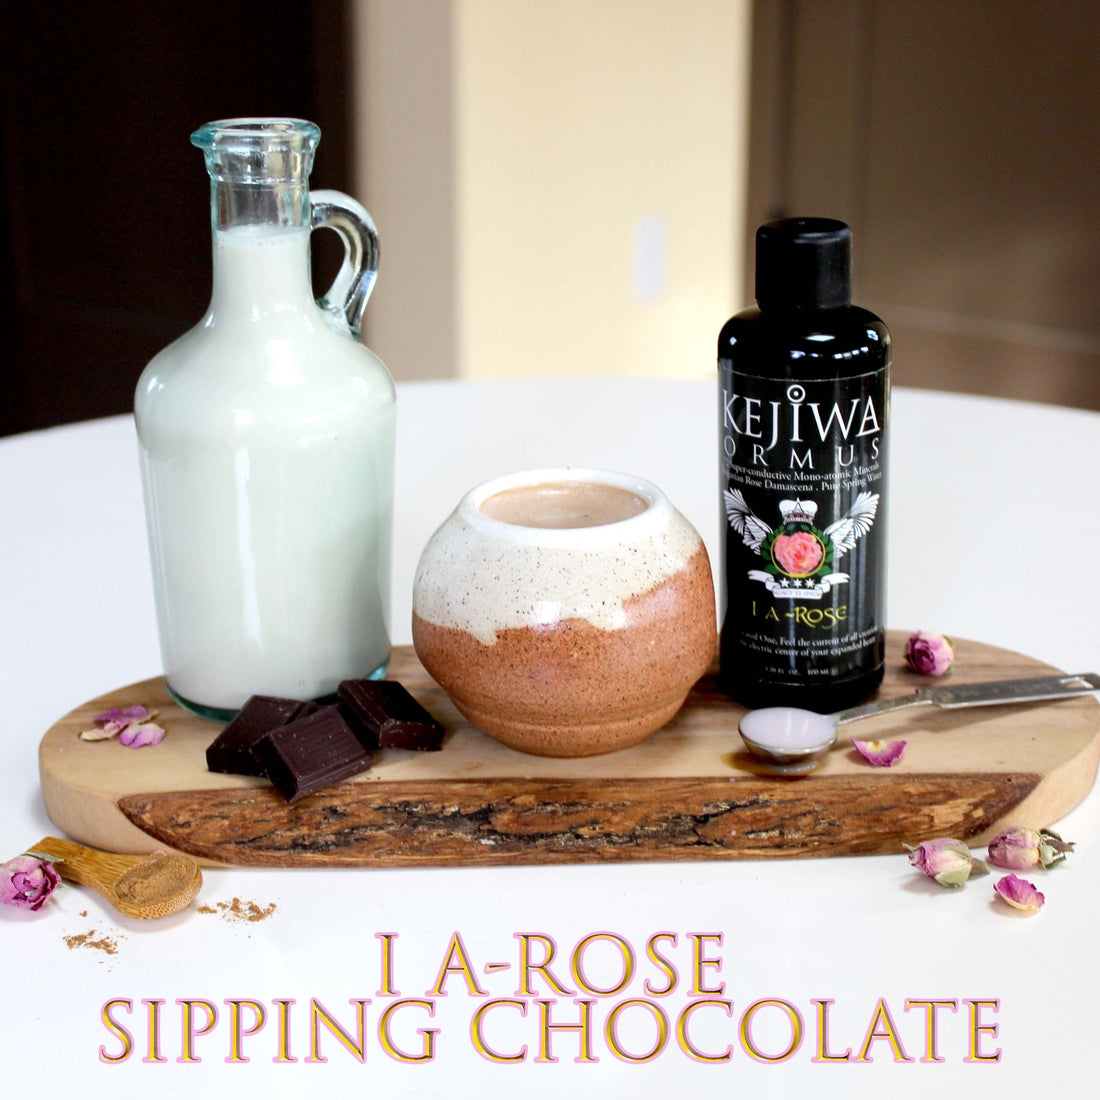 I A-Rose Ormus Sipping Chocolate Recipe